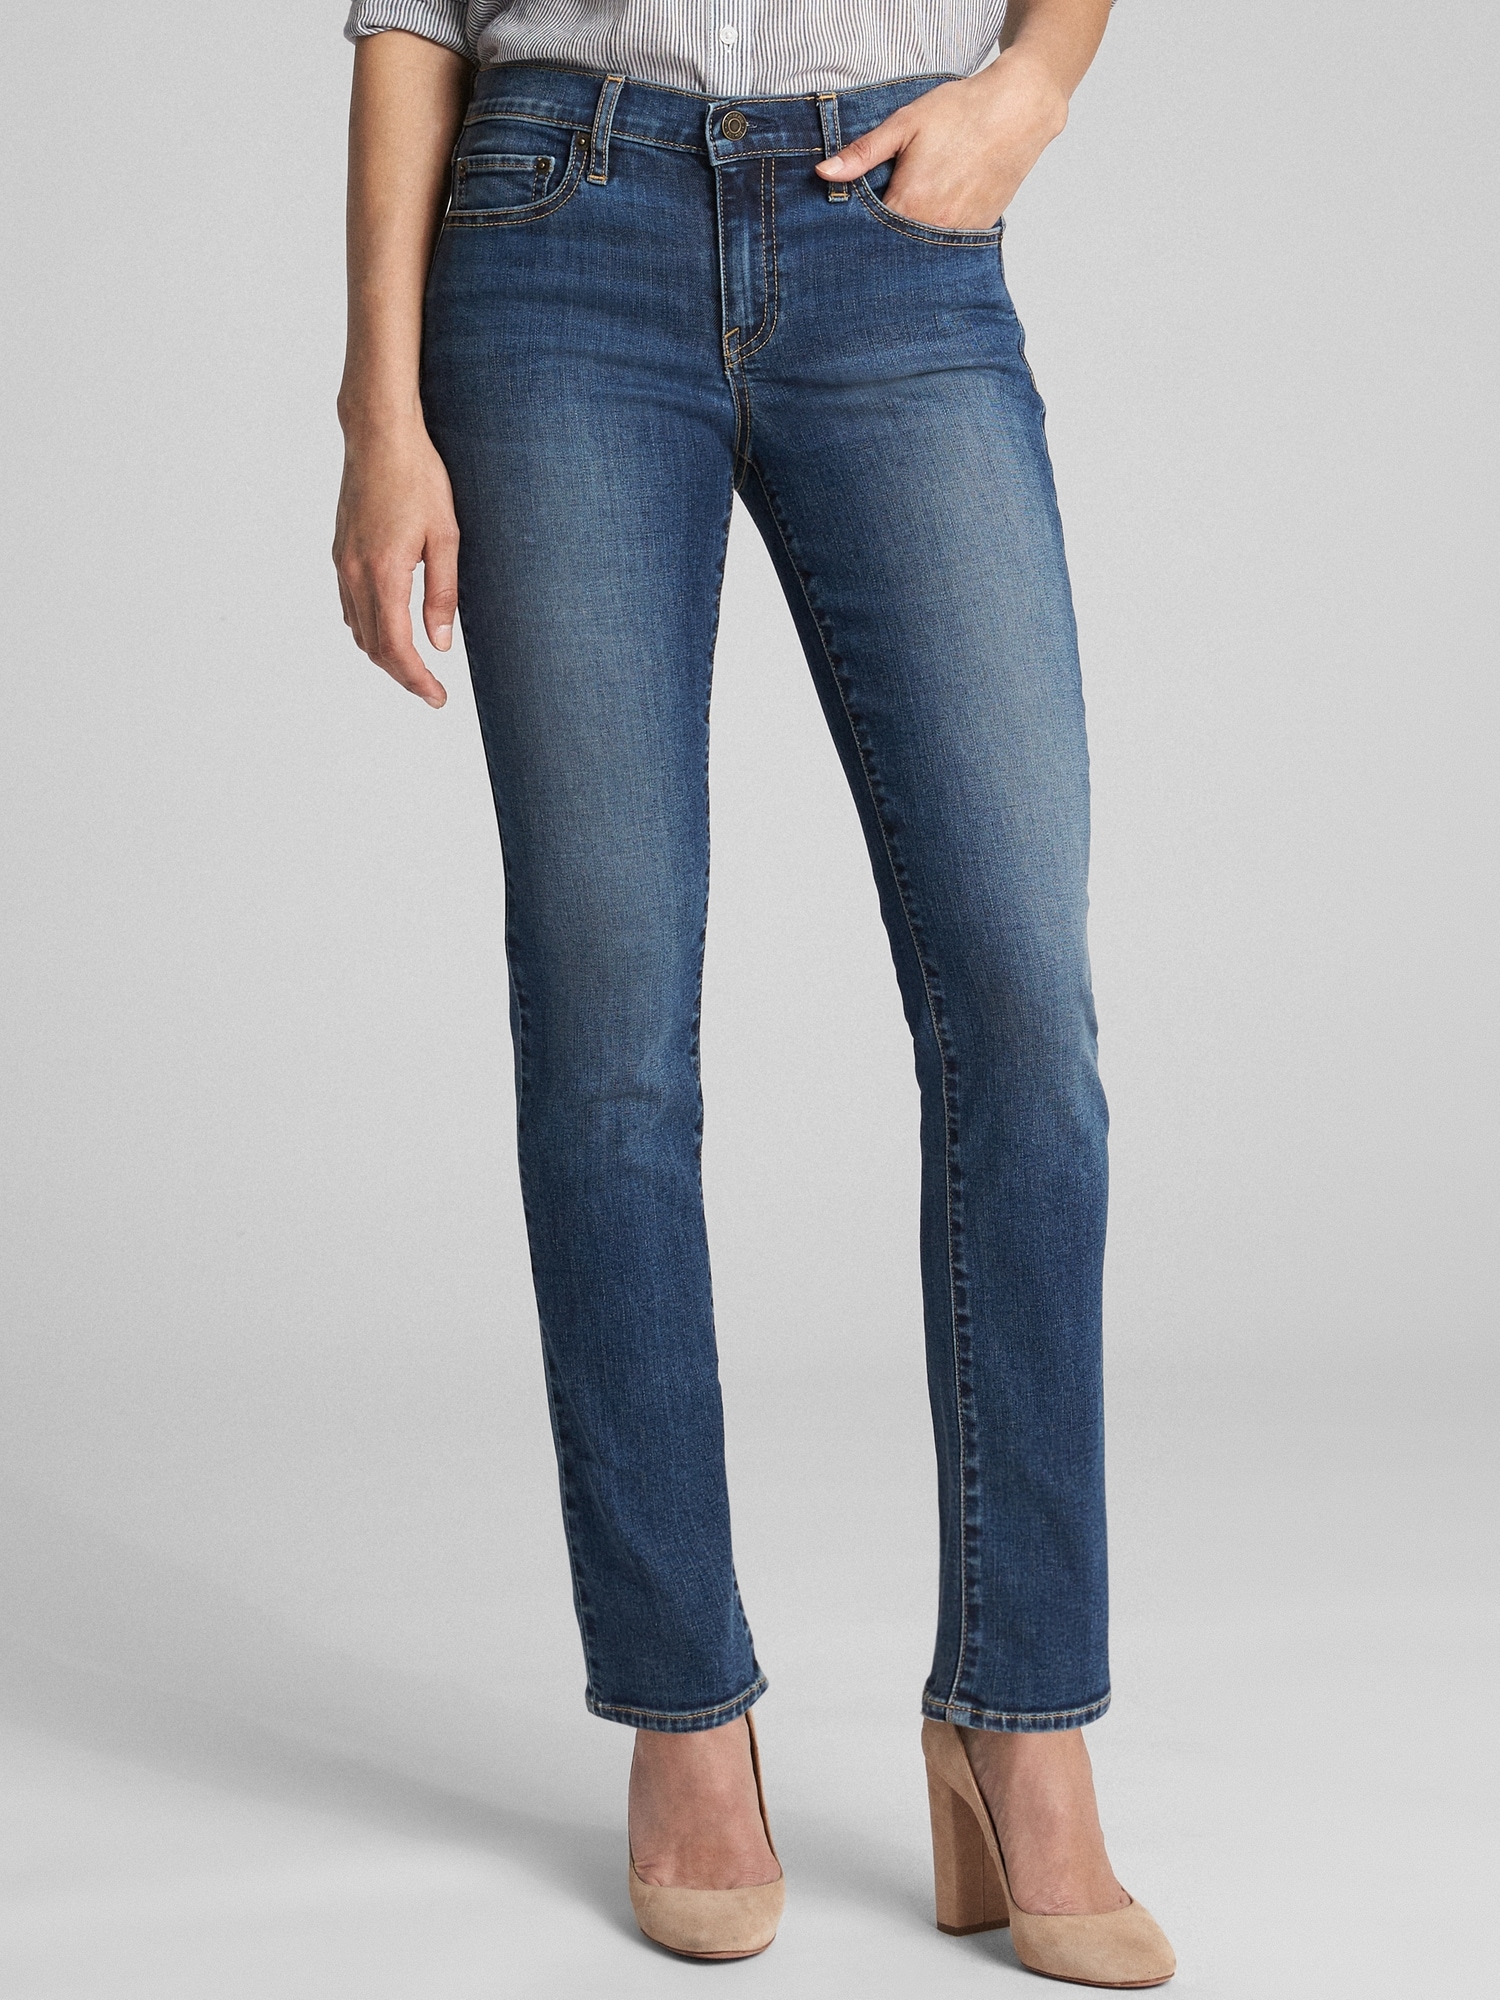 Mid Rise Classic Straight Jeans | Gap Factory